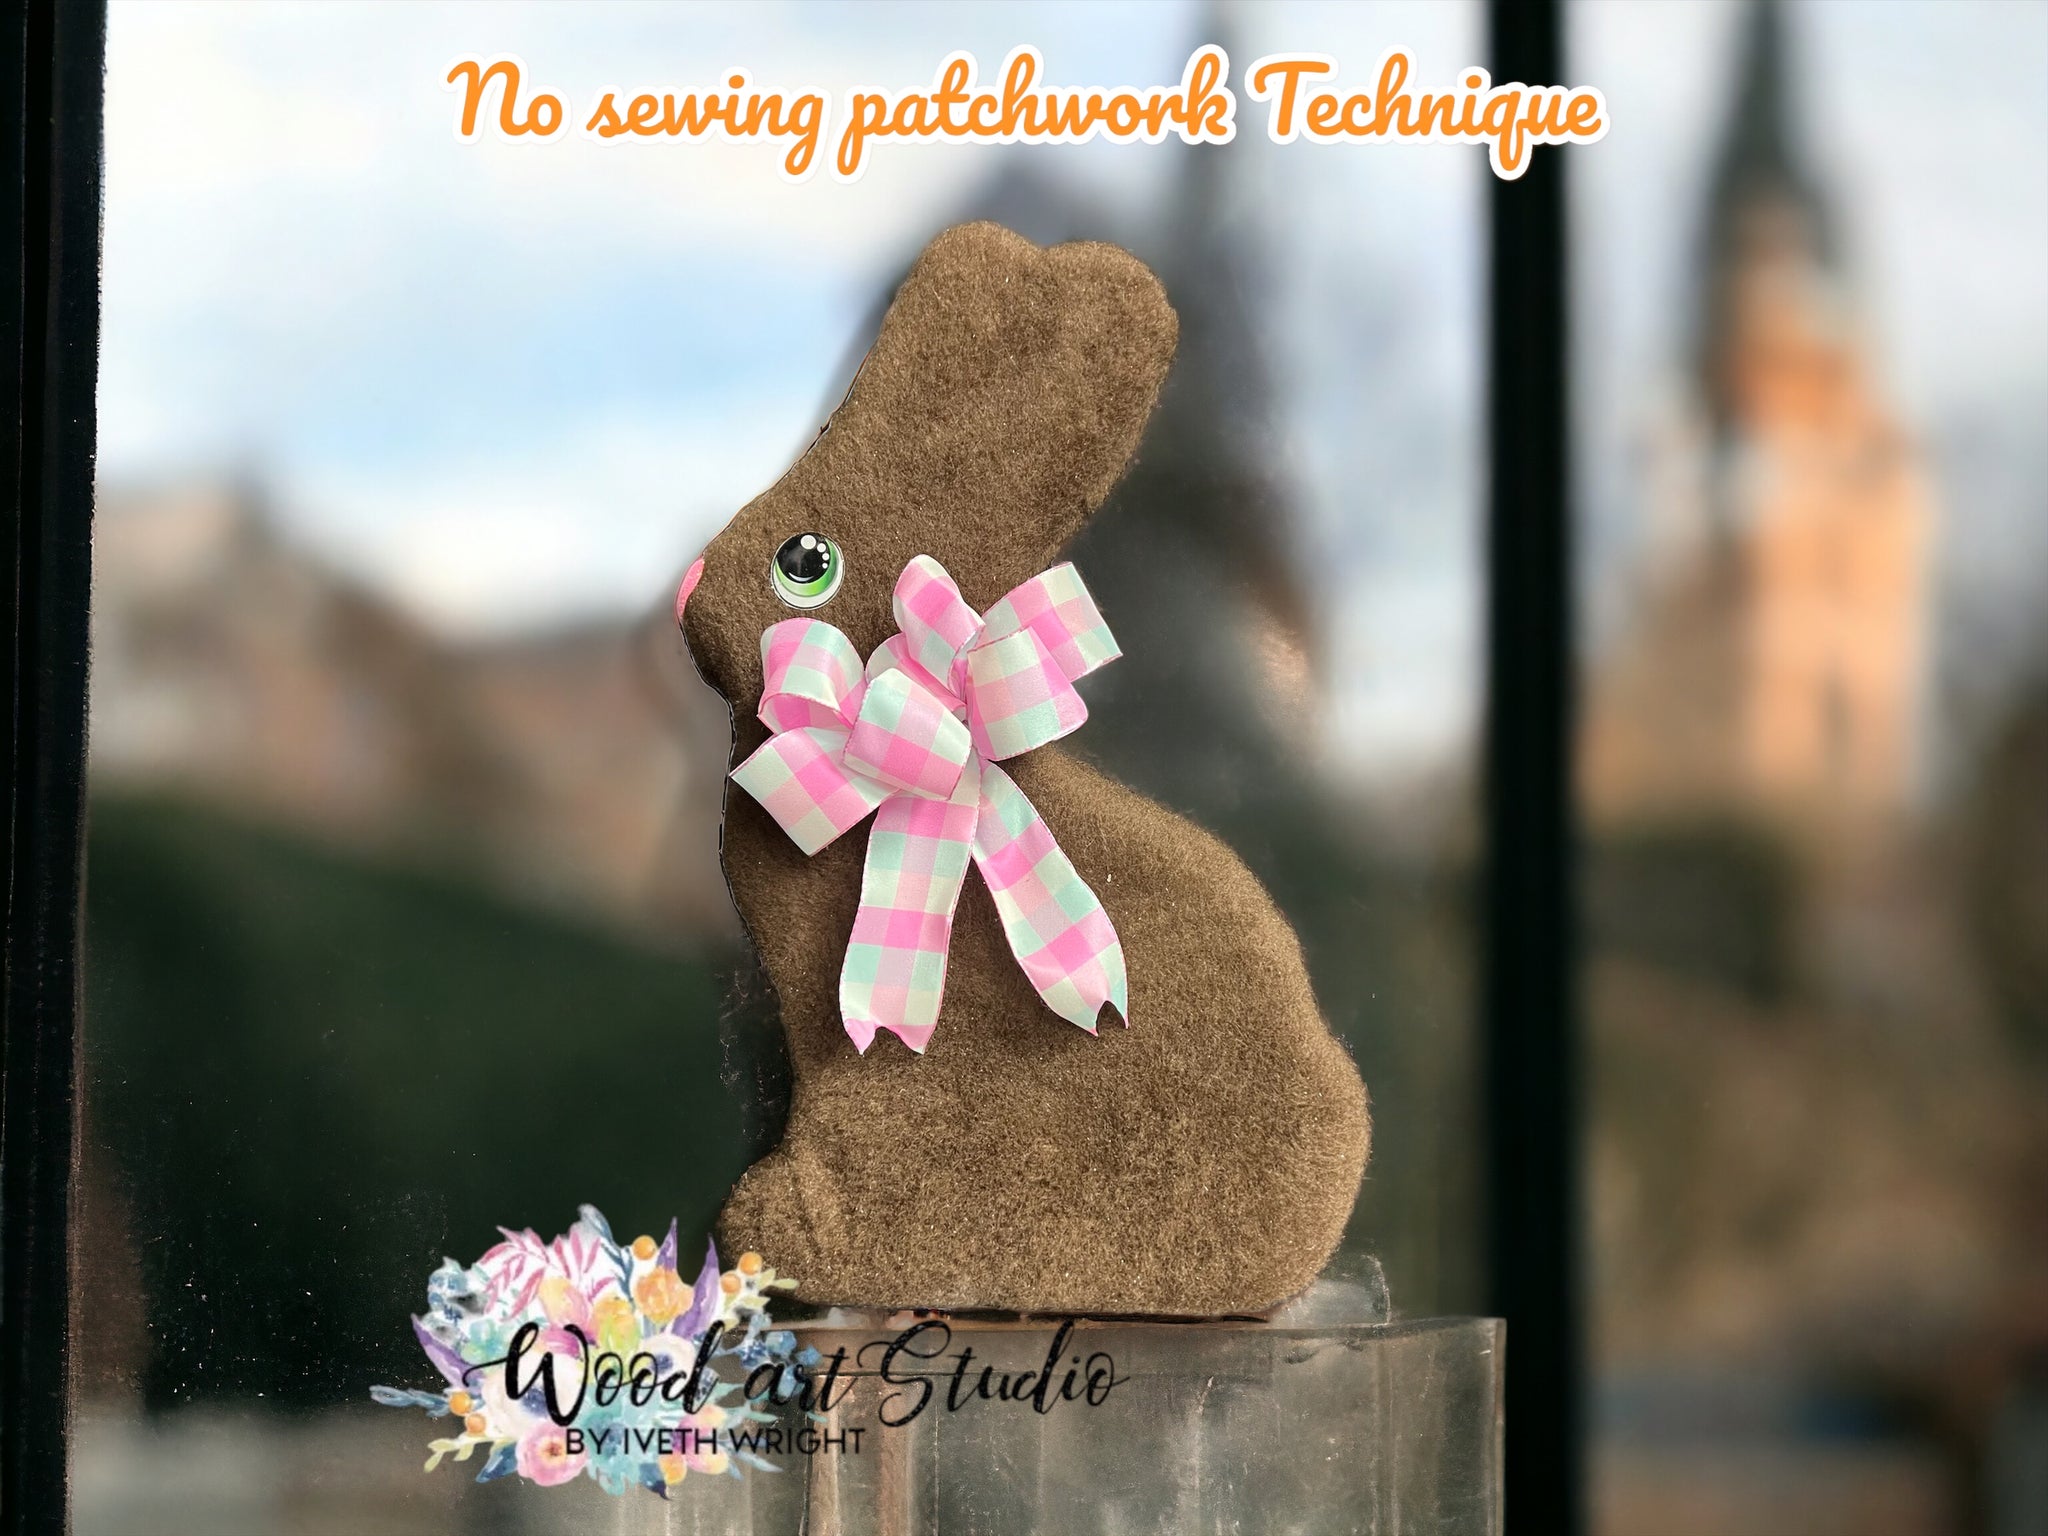 Chocolate bunny no sewing patchwork technique kit